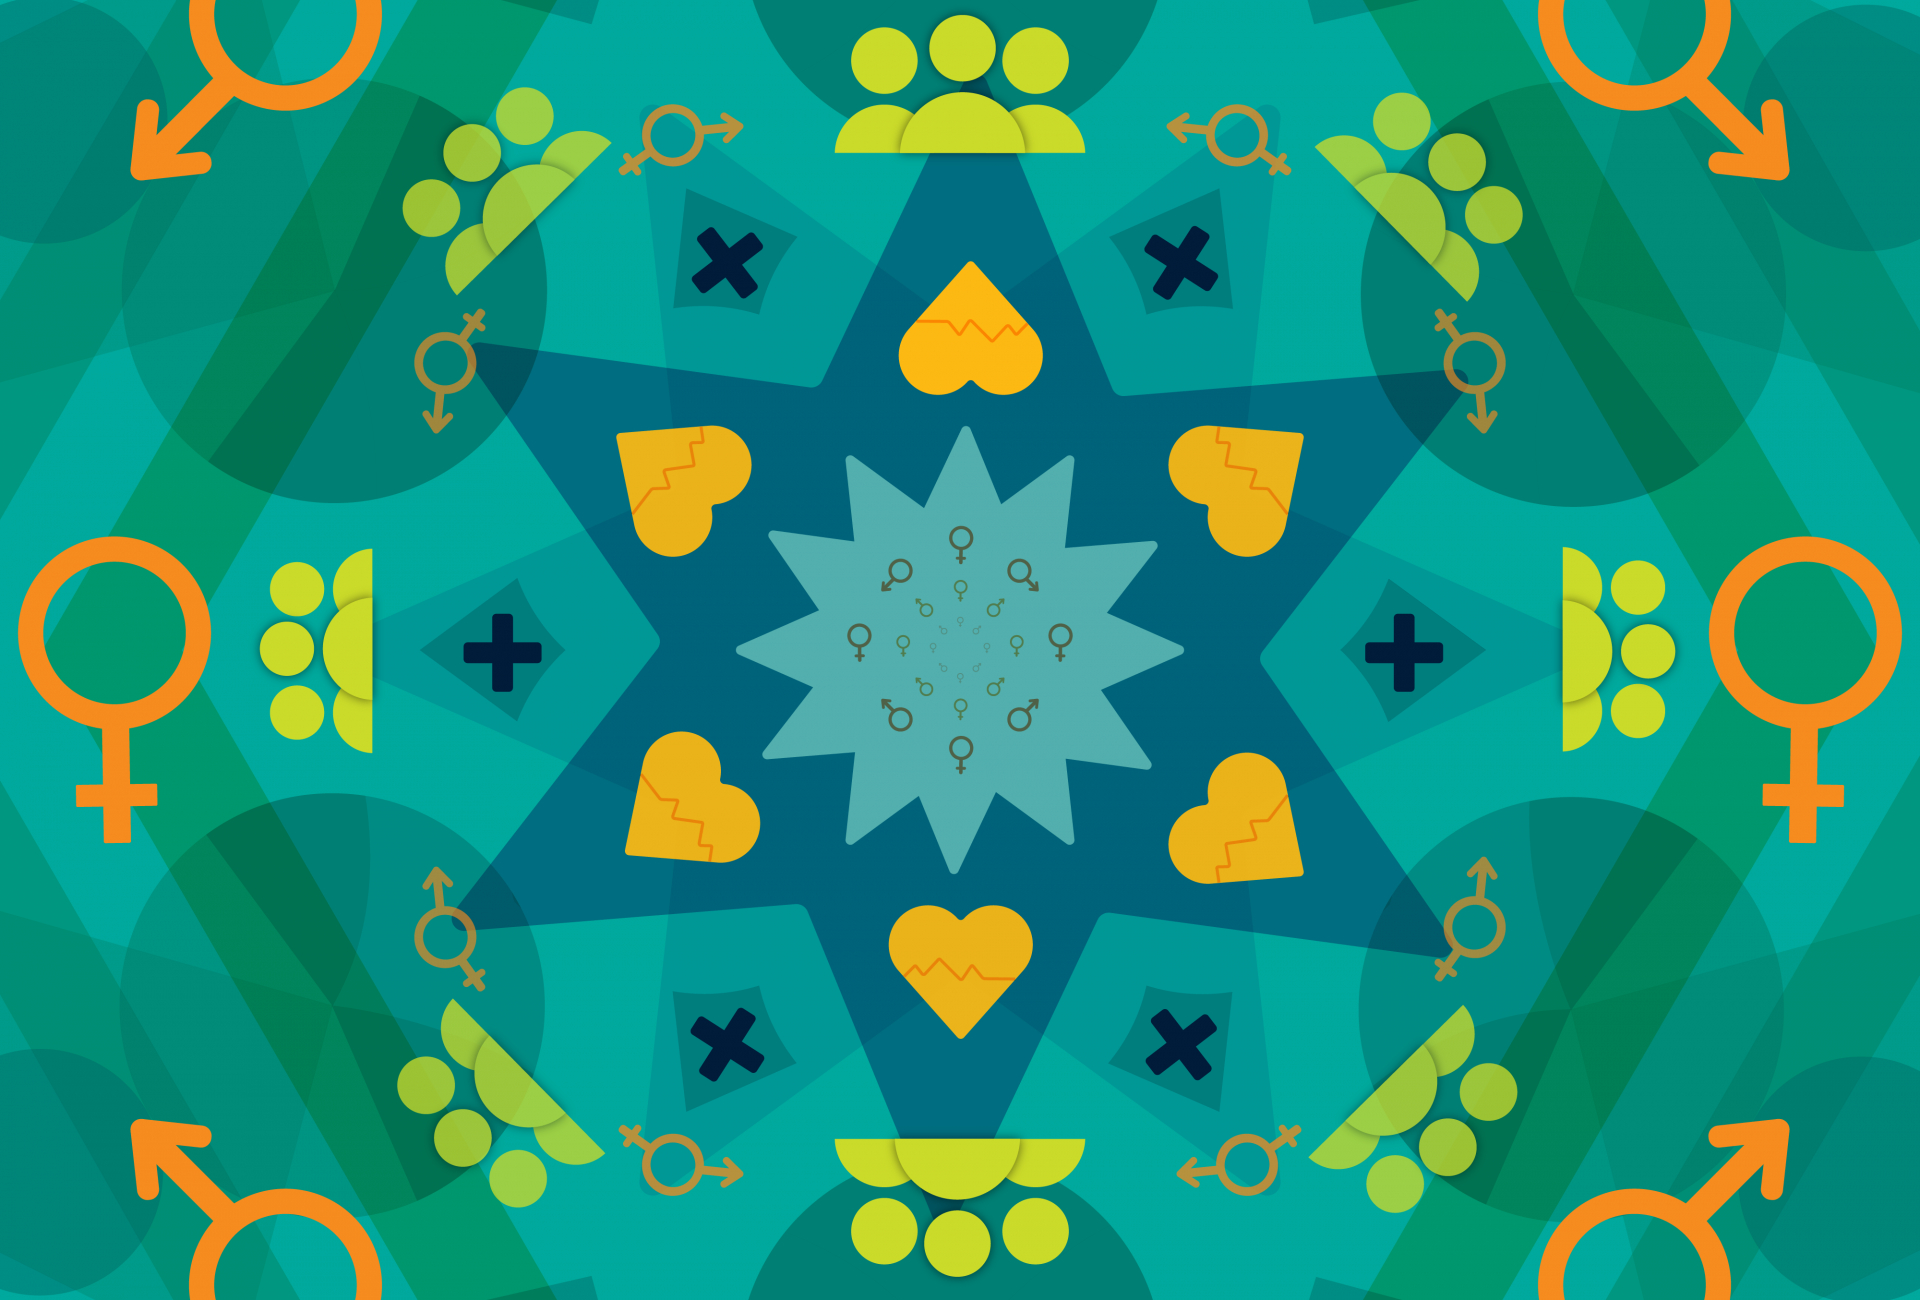 Kaleidoscope pattern with symbols representing gender, health and relationships.